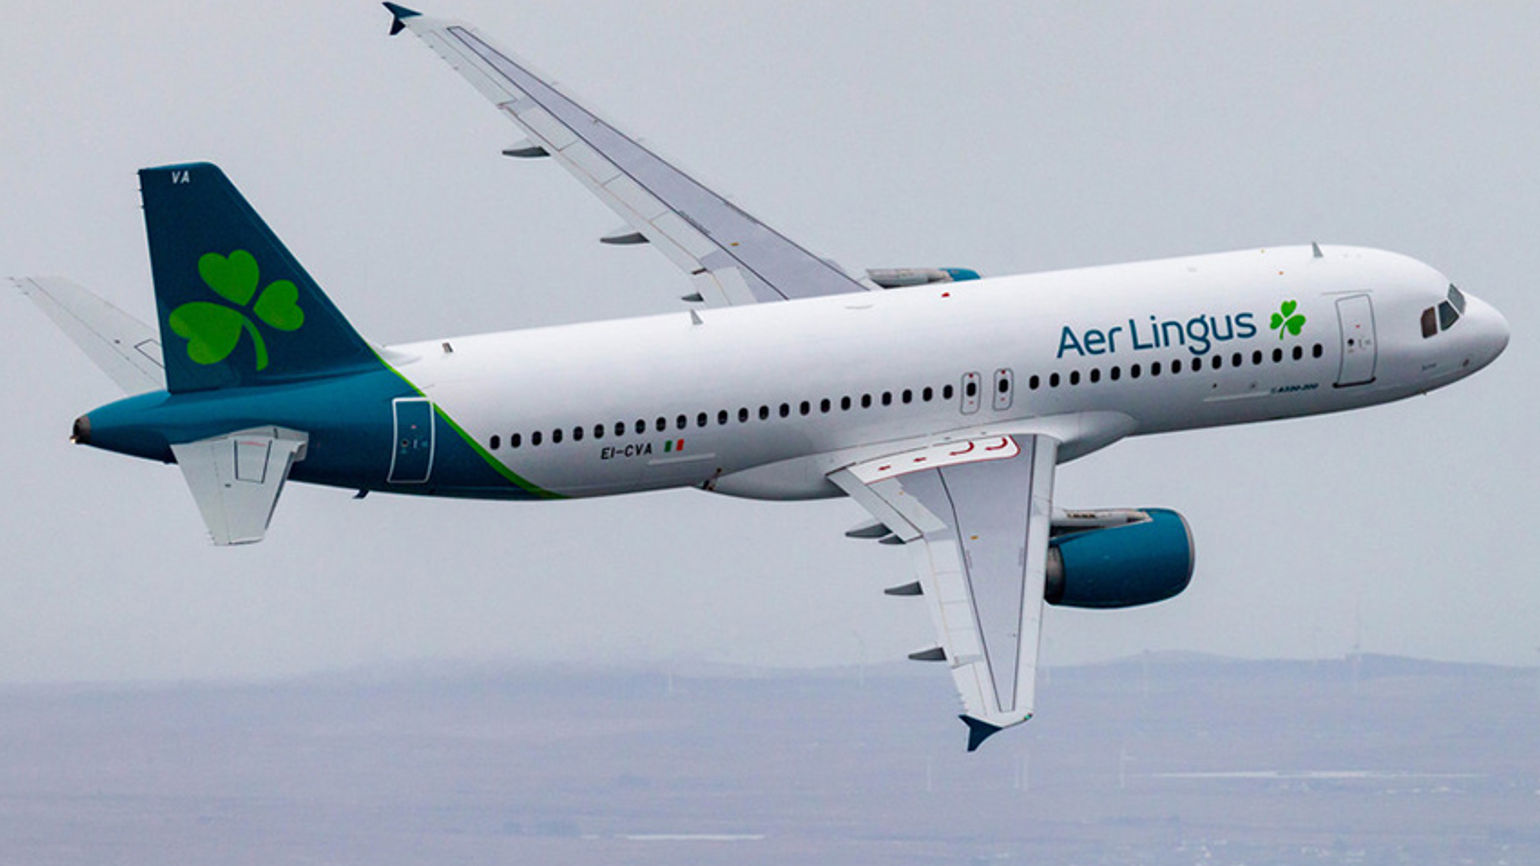 Aer Lingus entry into IAG-American Airlines JV approved